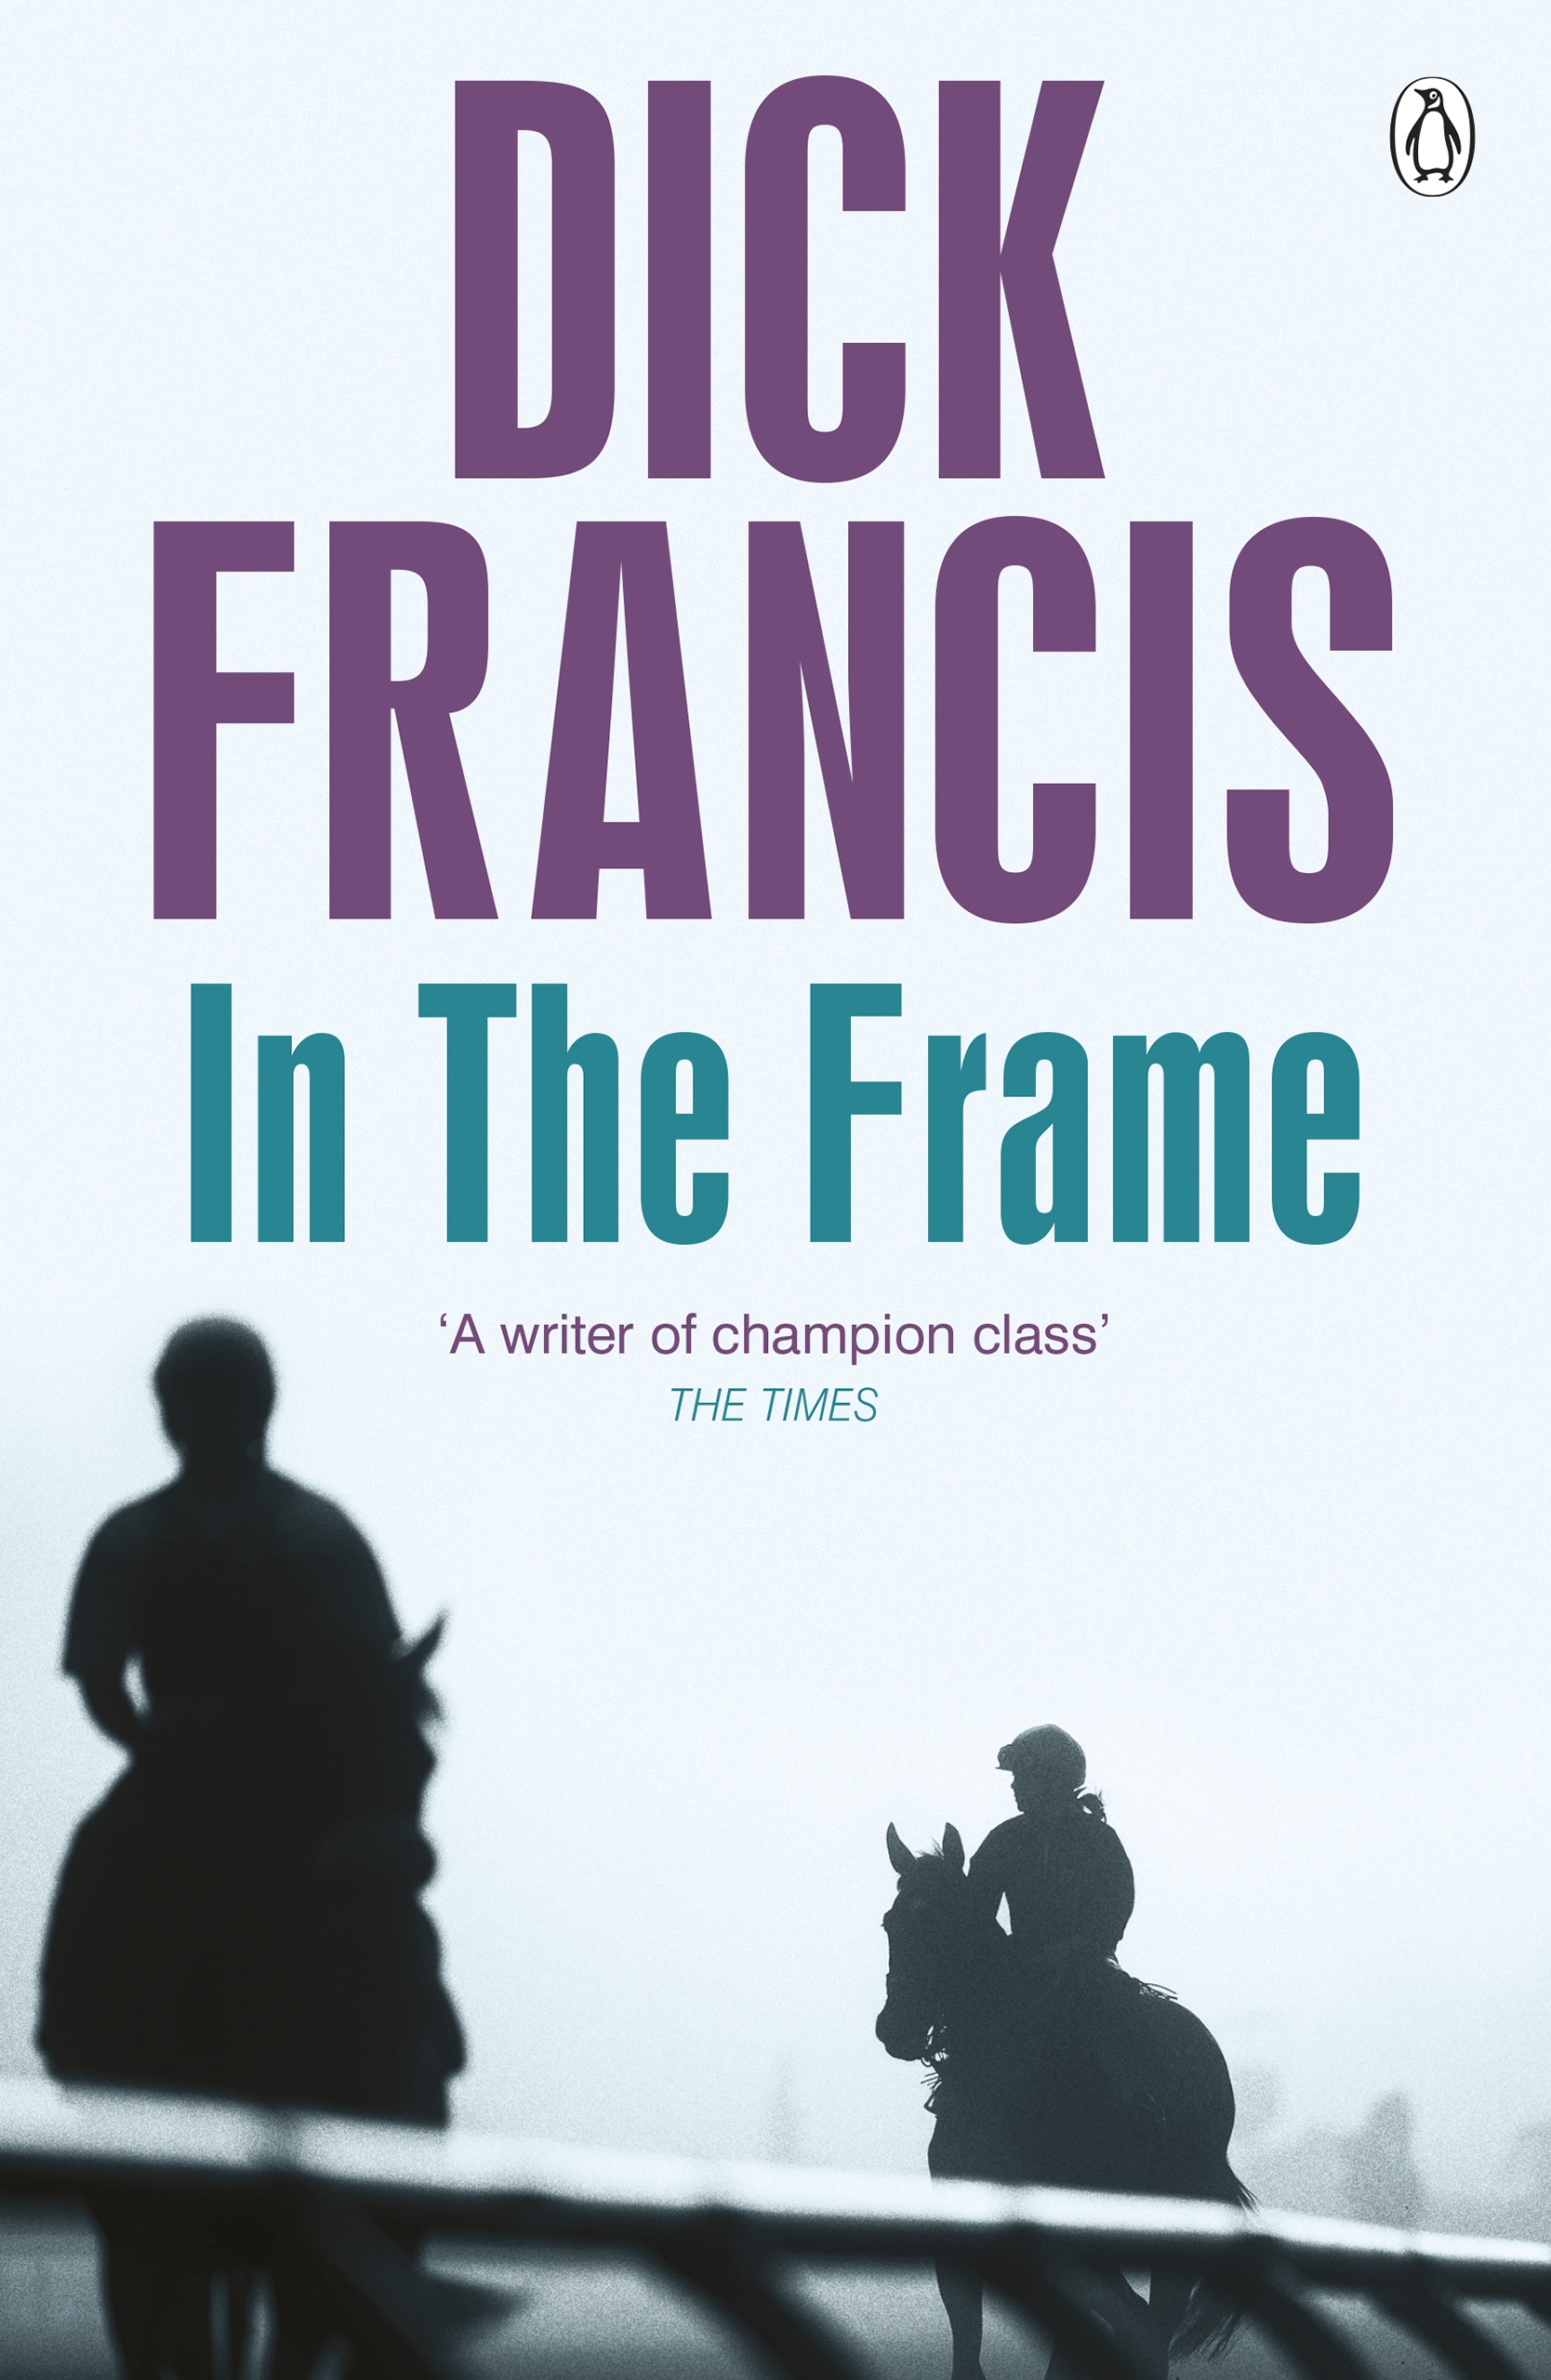 Cover for "In the Frame" by DIck Francis